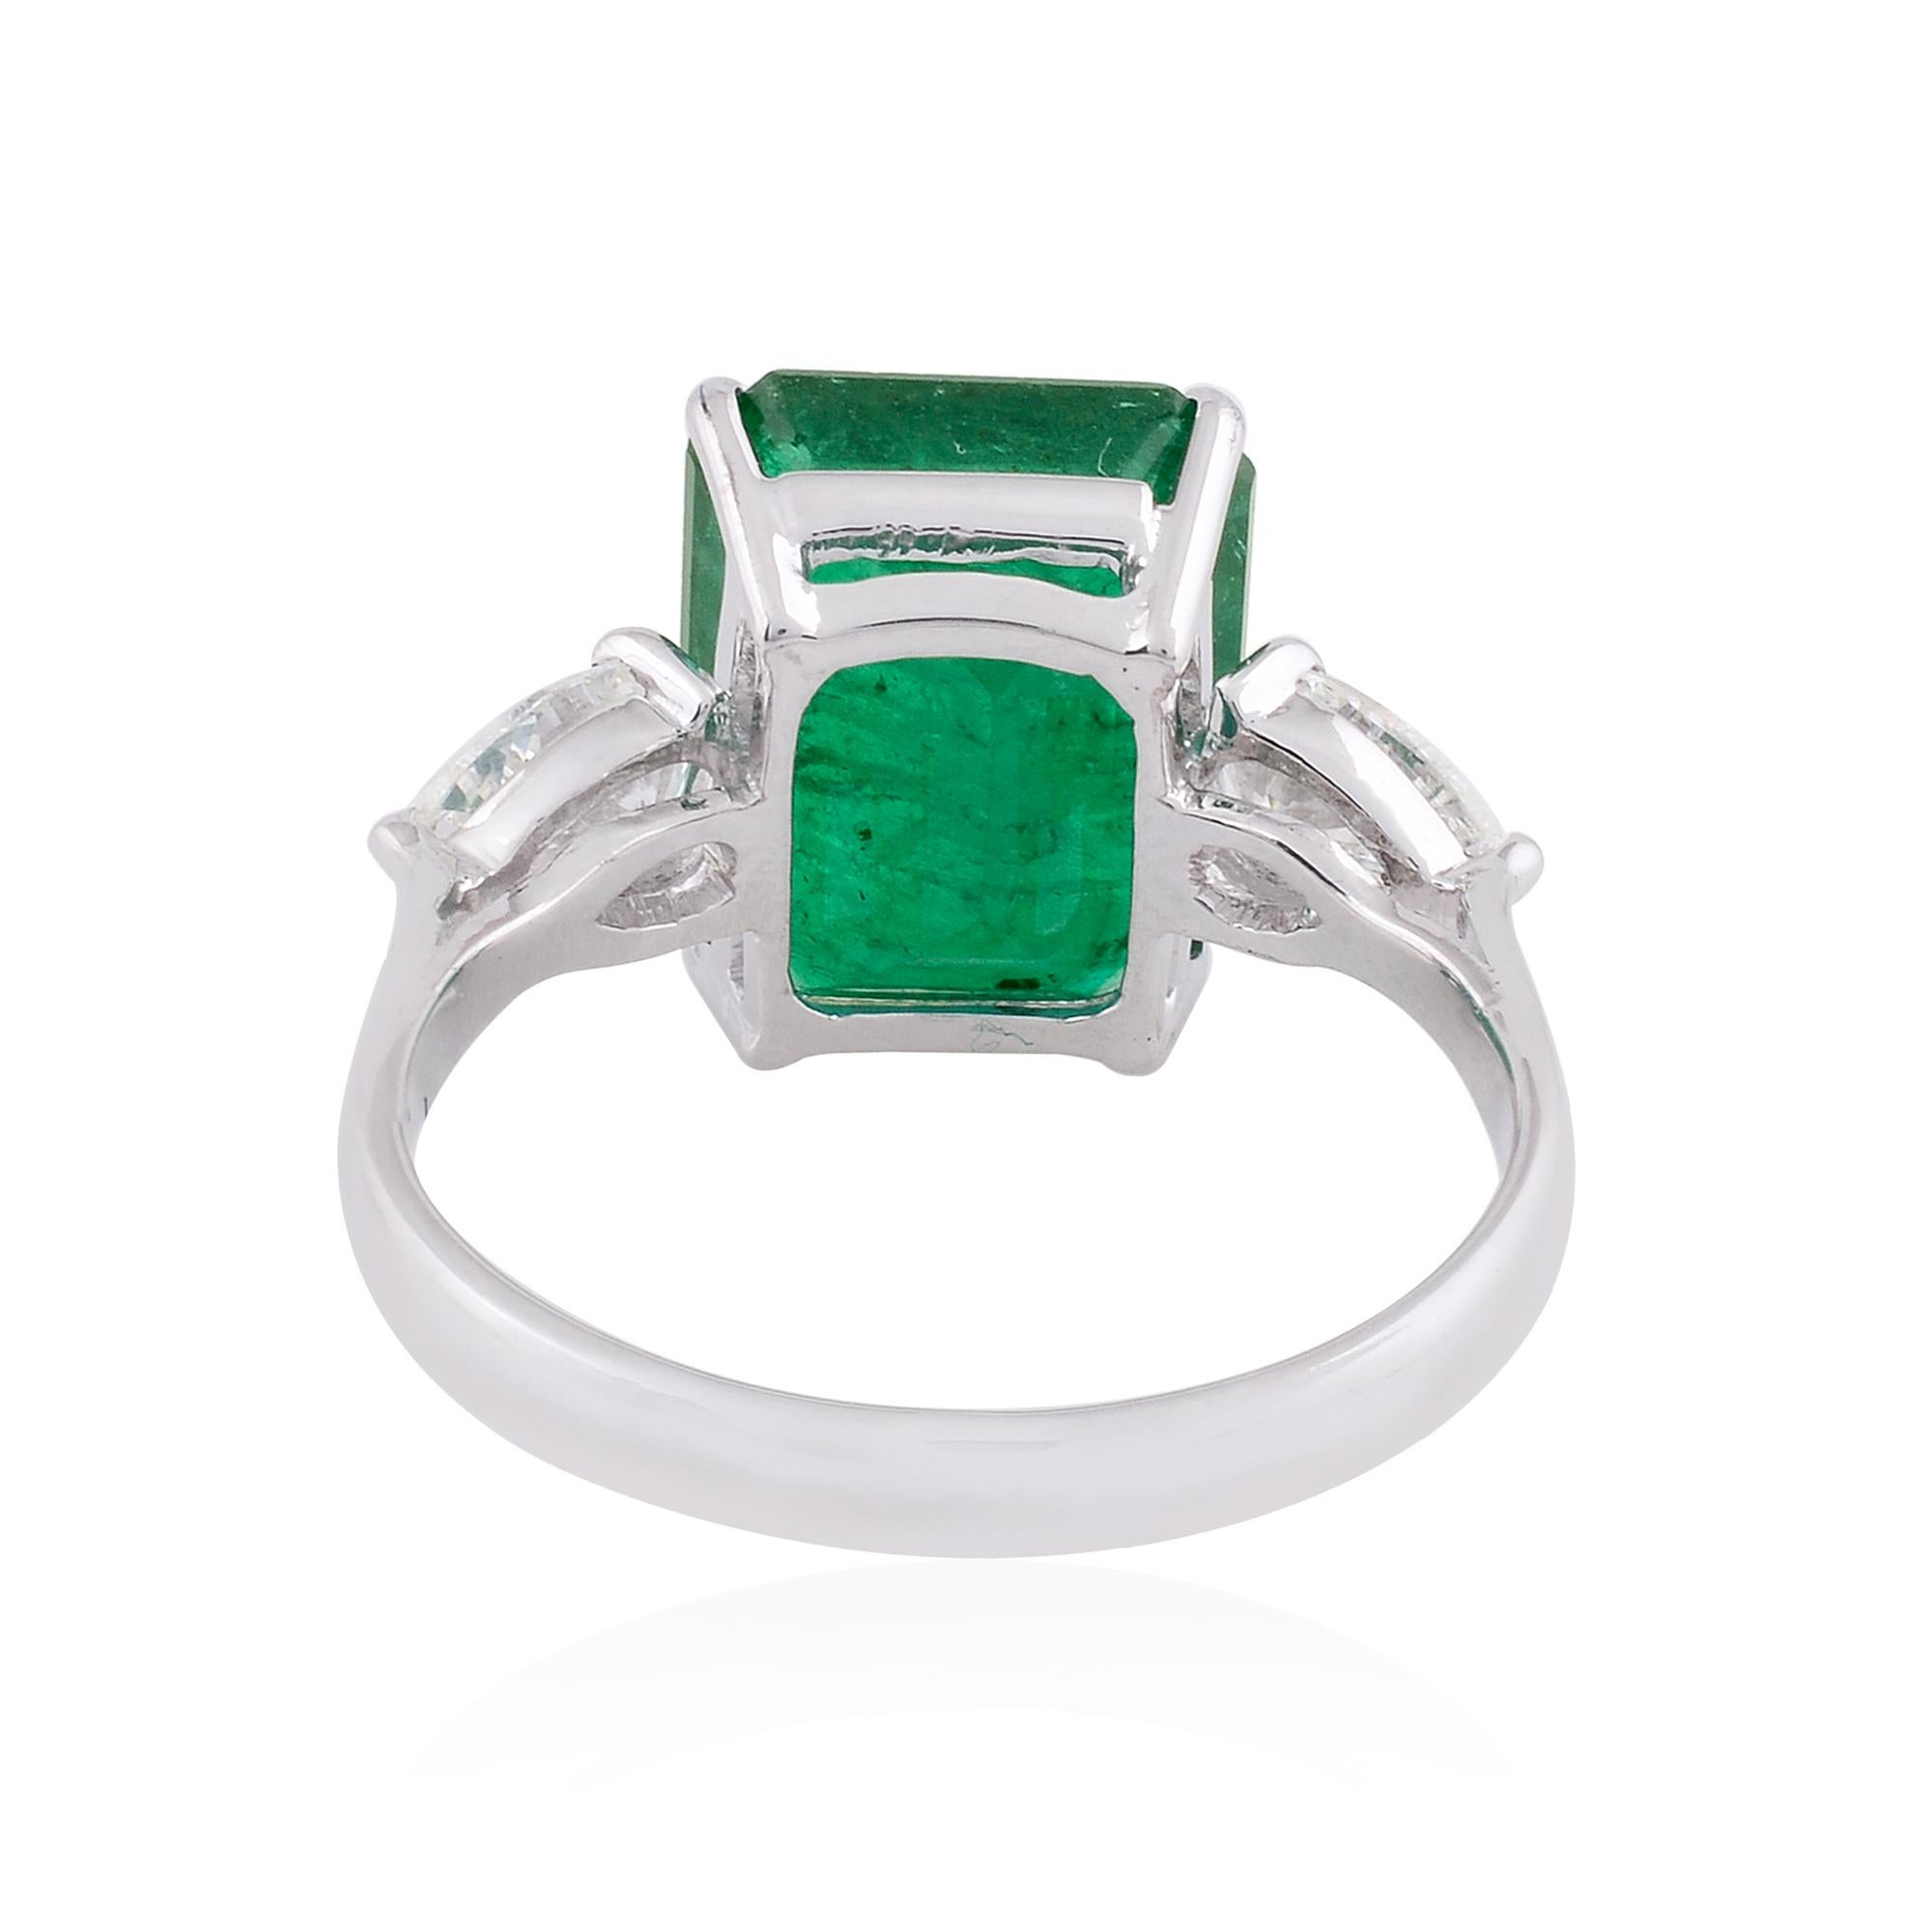 For Sale:  Natural Emerald Gemstone Cocktail Ring Diamond 18k White Gold Handmade Jewelry 4